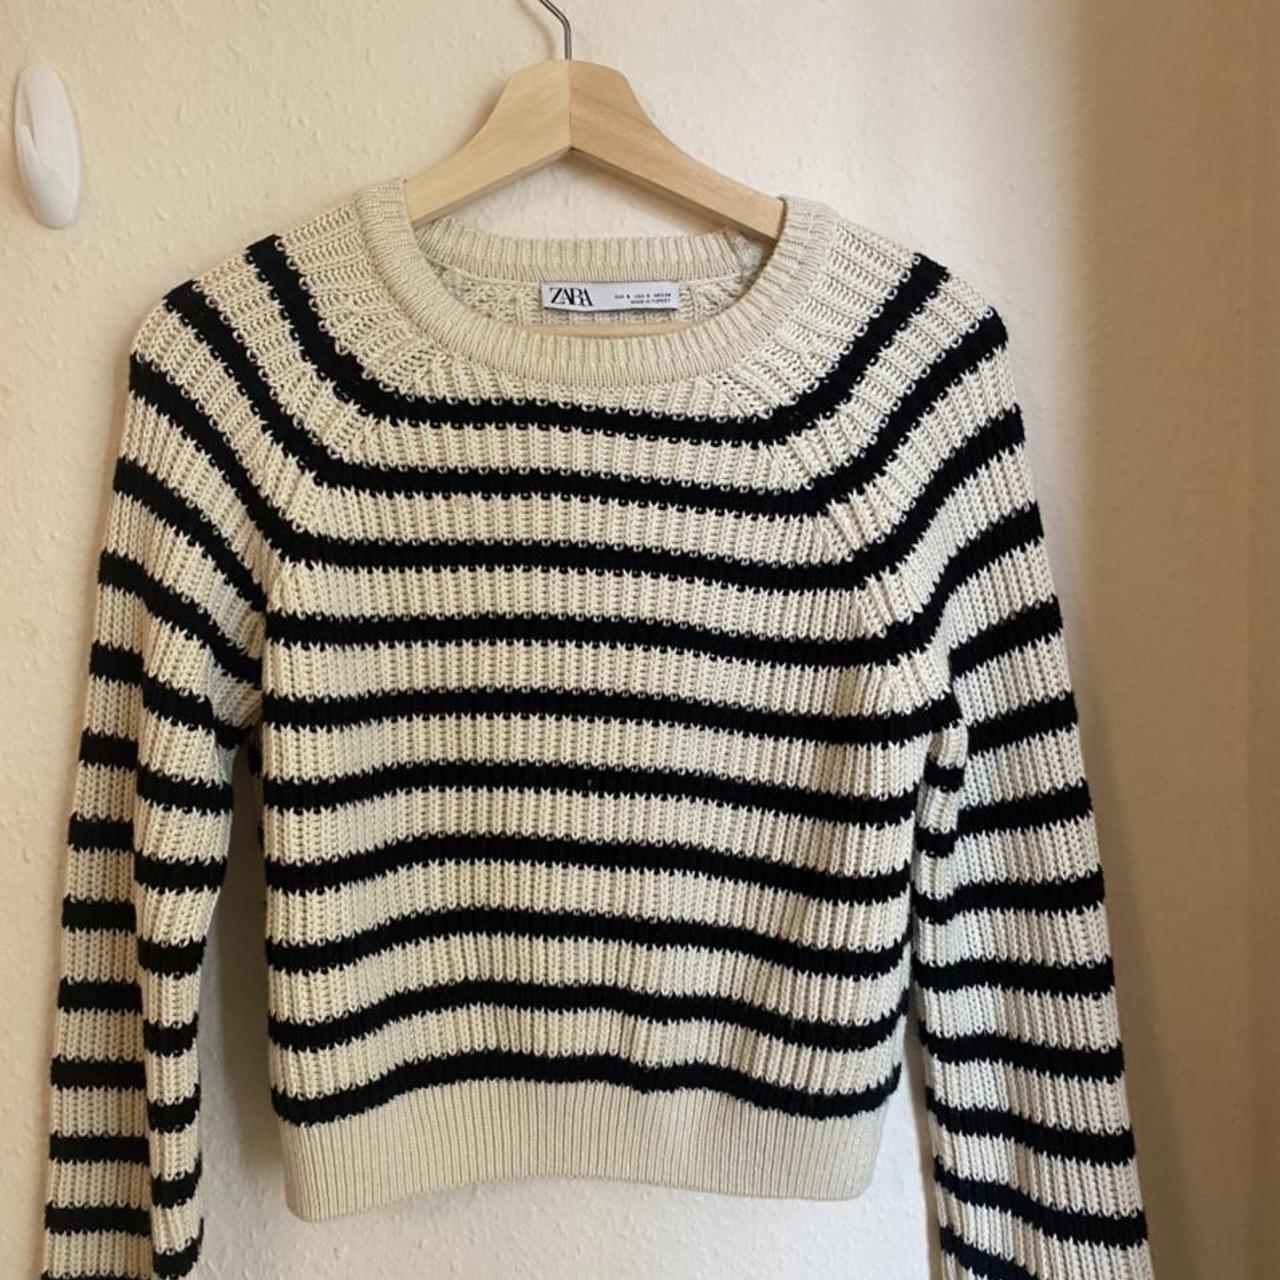 Zara cropped sweater Great condition Autumnal... - Depop